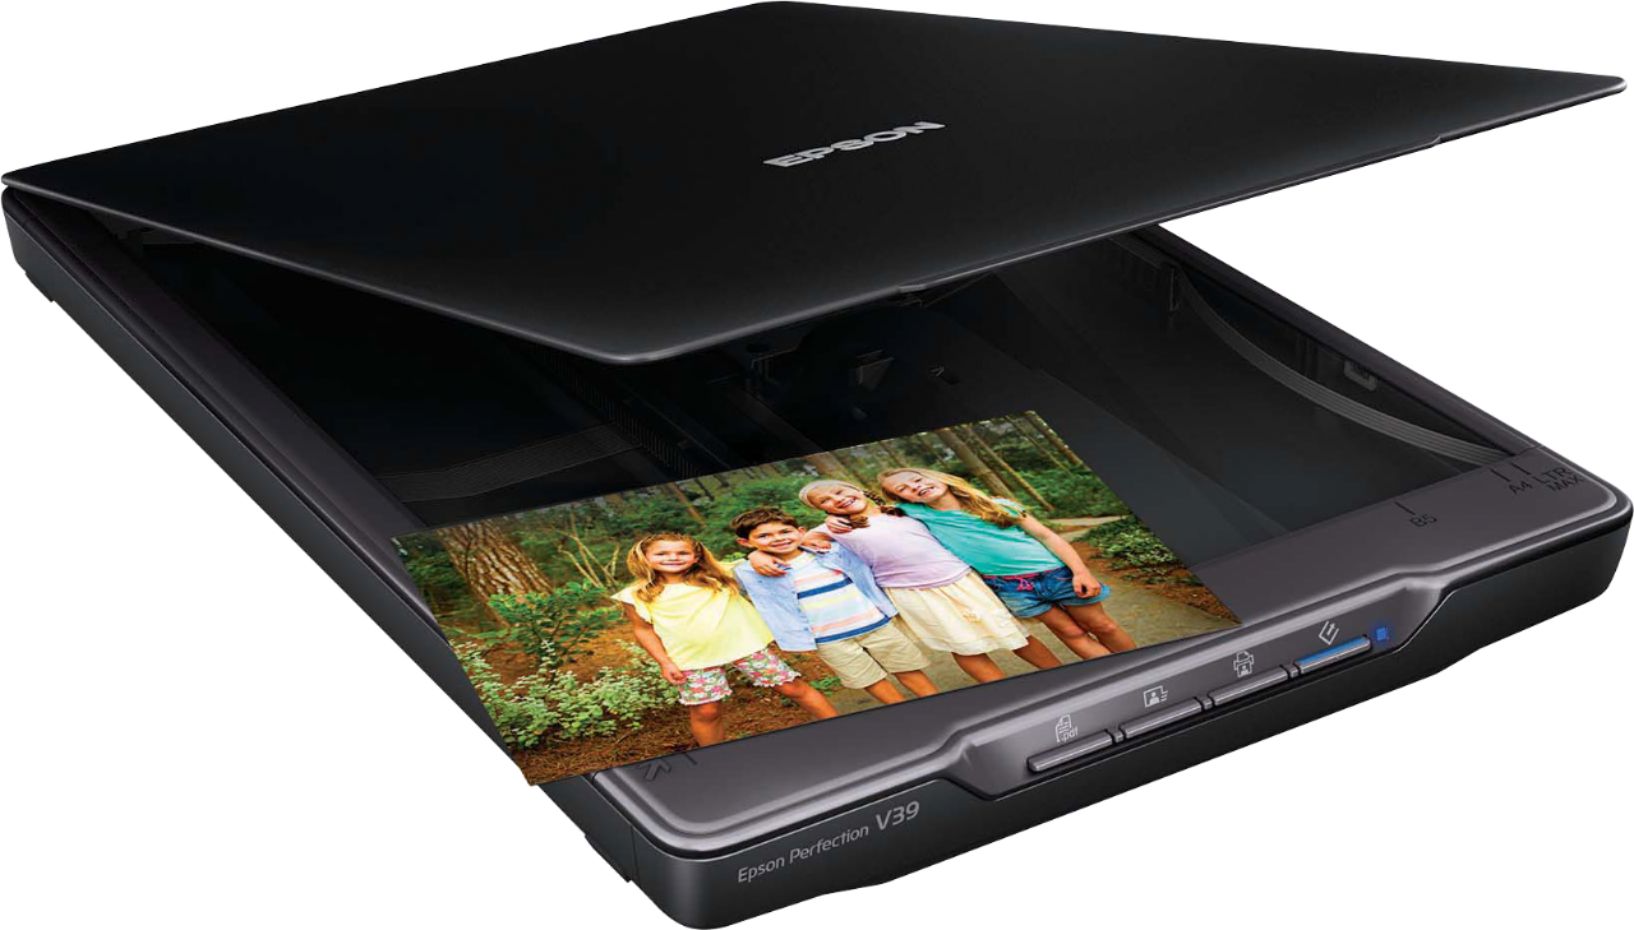 Angle View: Epson - Perfection V39 Advanced Flatbed Color Photo Scanner - Black